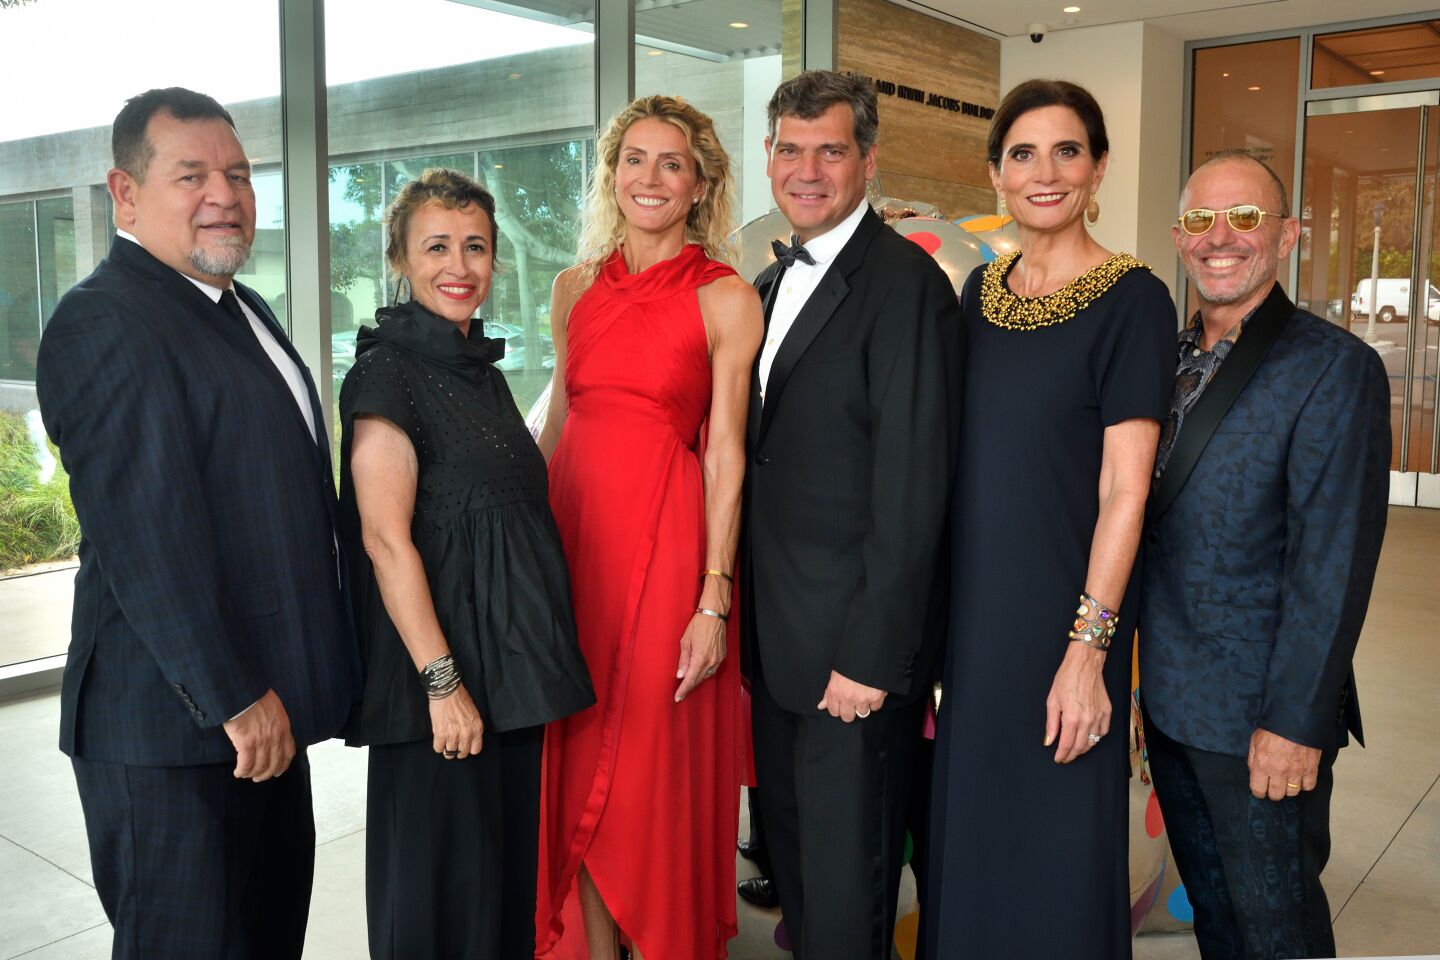 Gala co-chair Marcos Ramirez ERRE, Coco Gonzalez, co-chair Dagmar Smek, Arman Oruc, museum Director and Chief Executive Kathryn Kanjo and David Jurist attend the Museum of Contemporary Art San Diego's "The Gala @MCASD" on Sept. 10 in La Jolla.